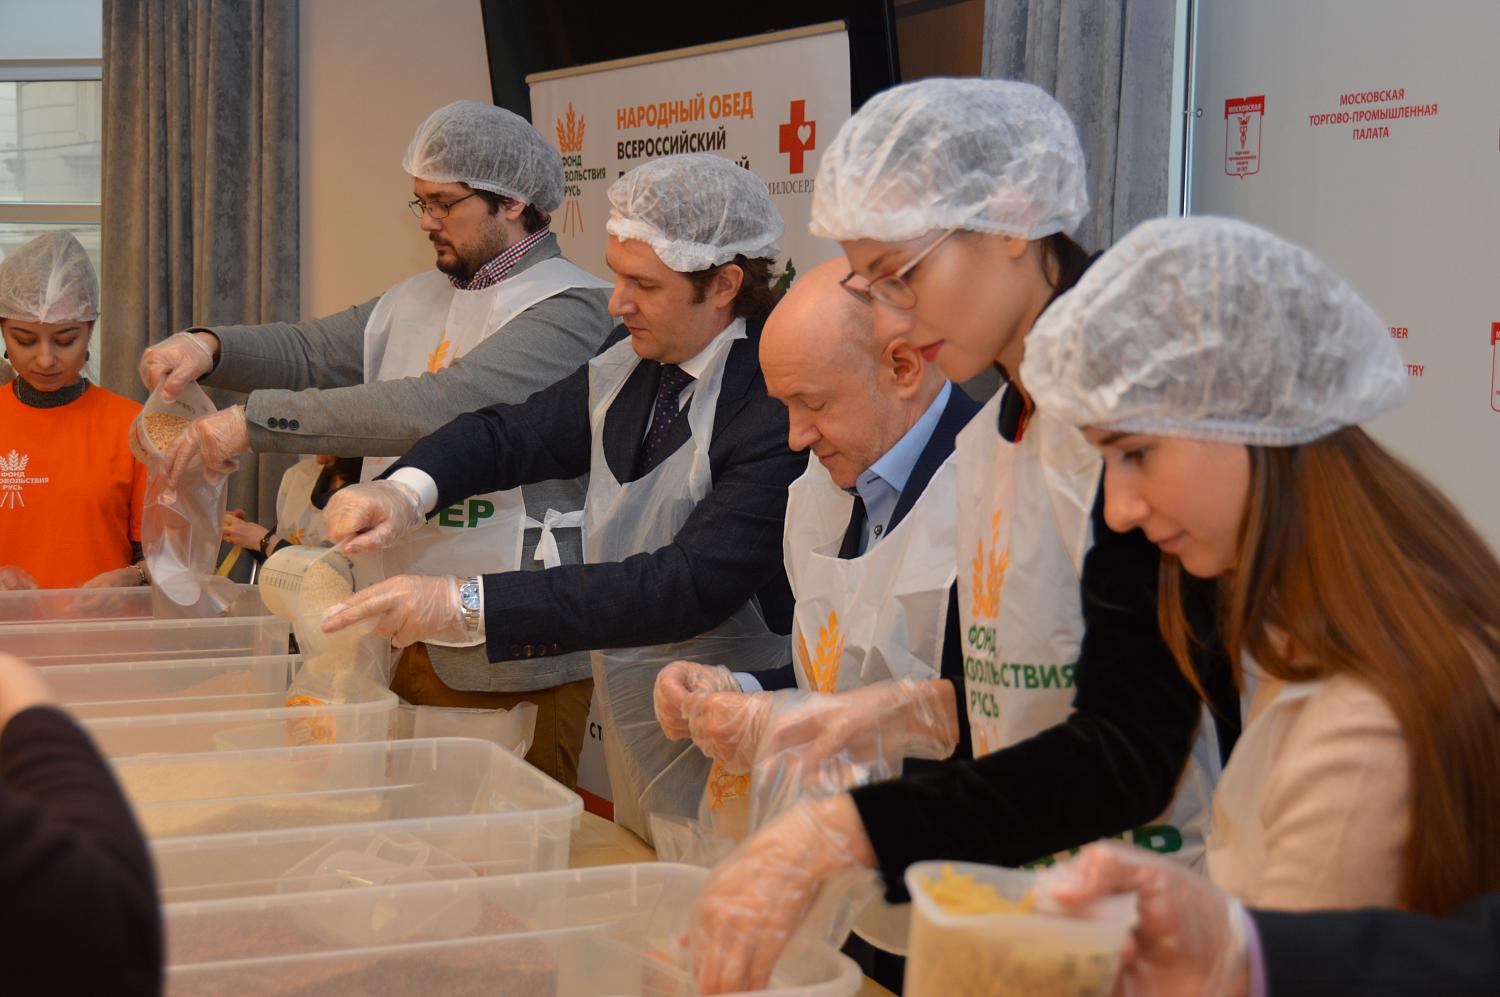 Staff of the Moscow Chamber of Commerce and Industry took part in the charity project Peoples lunch